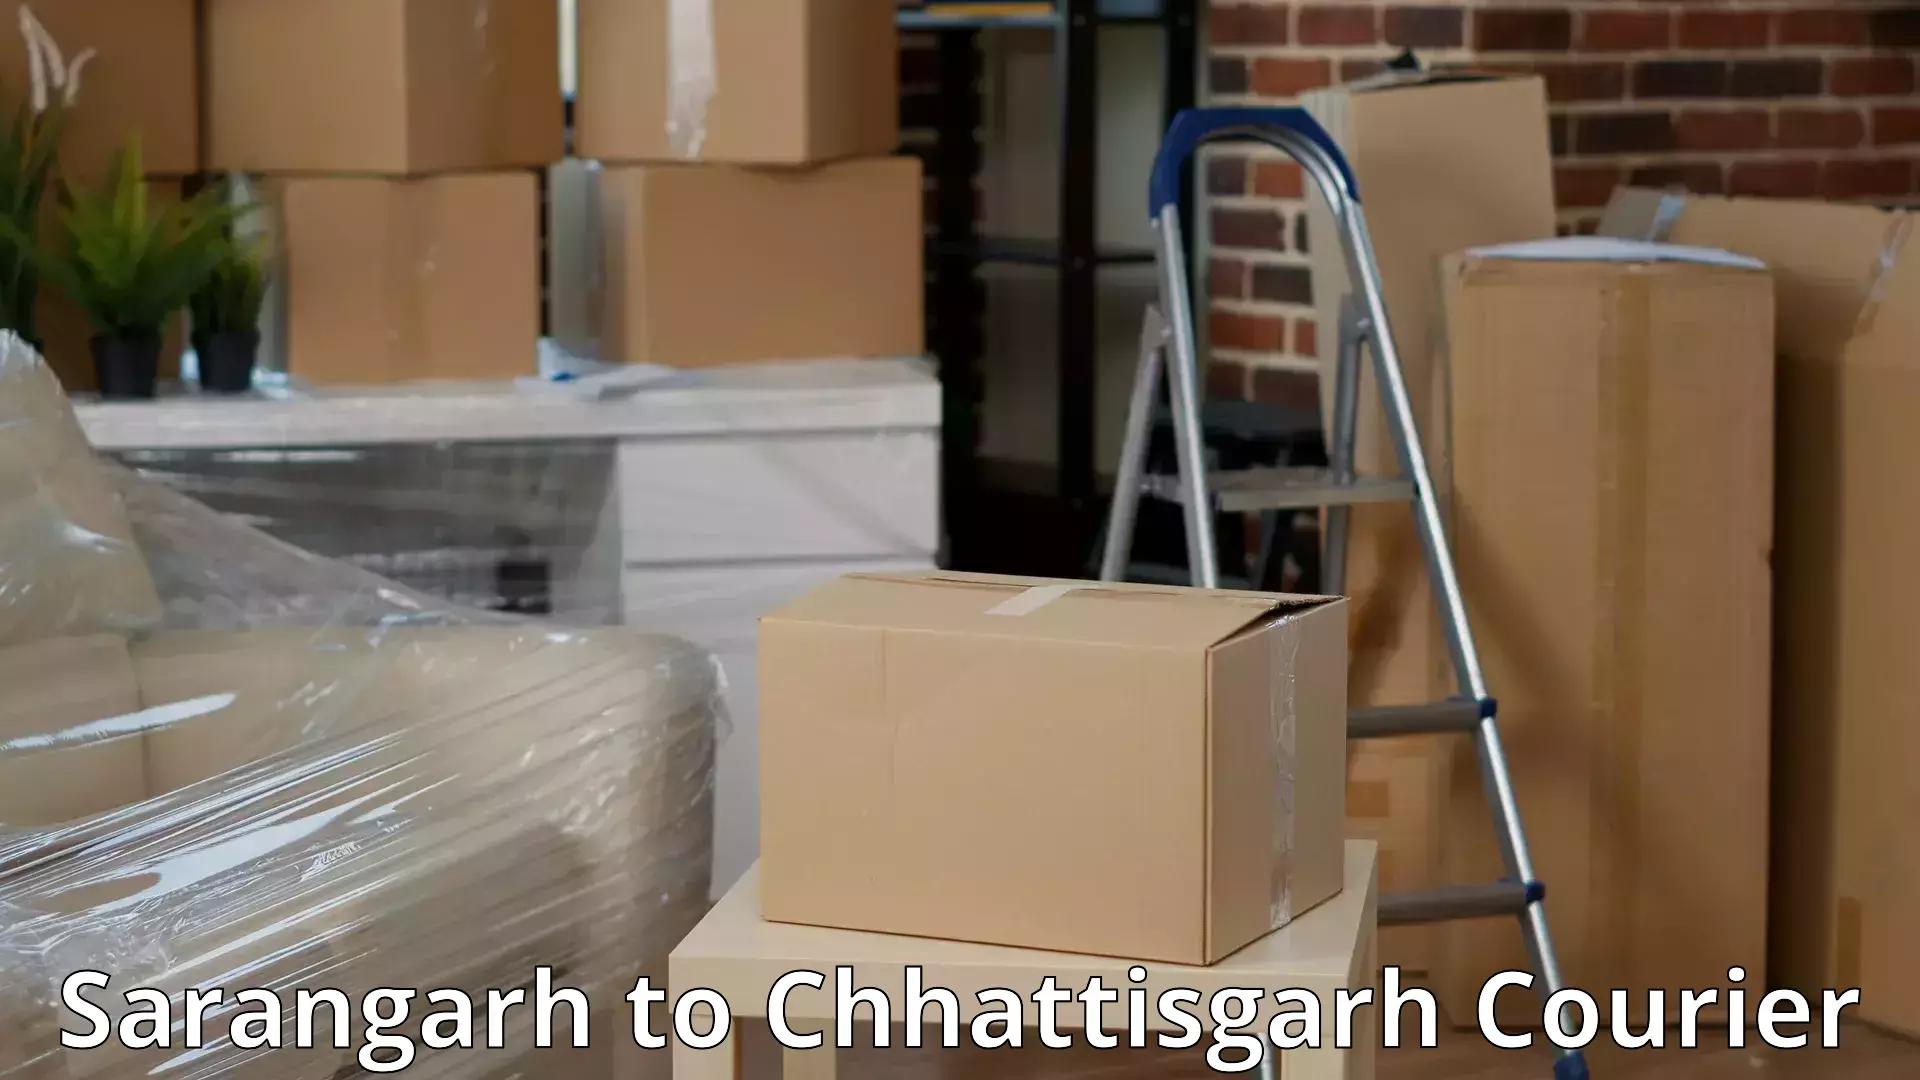 Trusted relocation experts Sarangarh to Charama